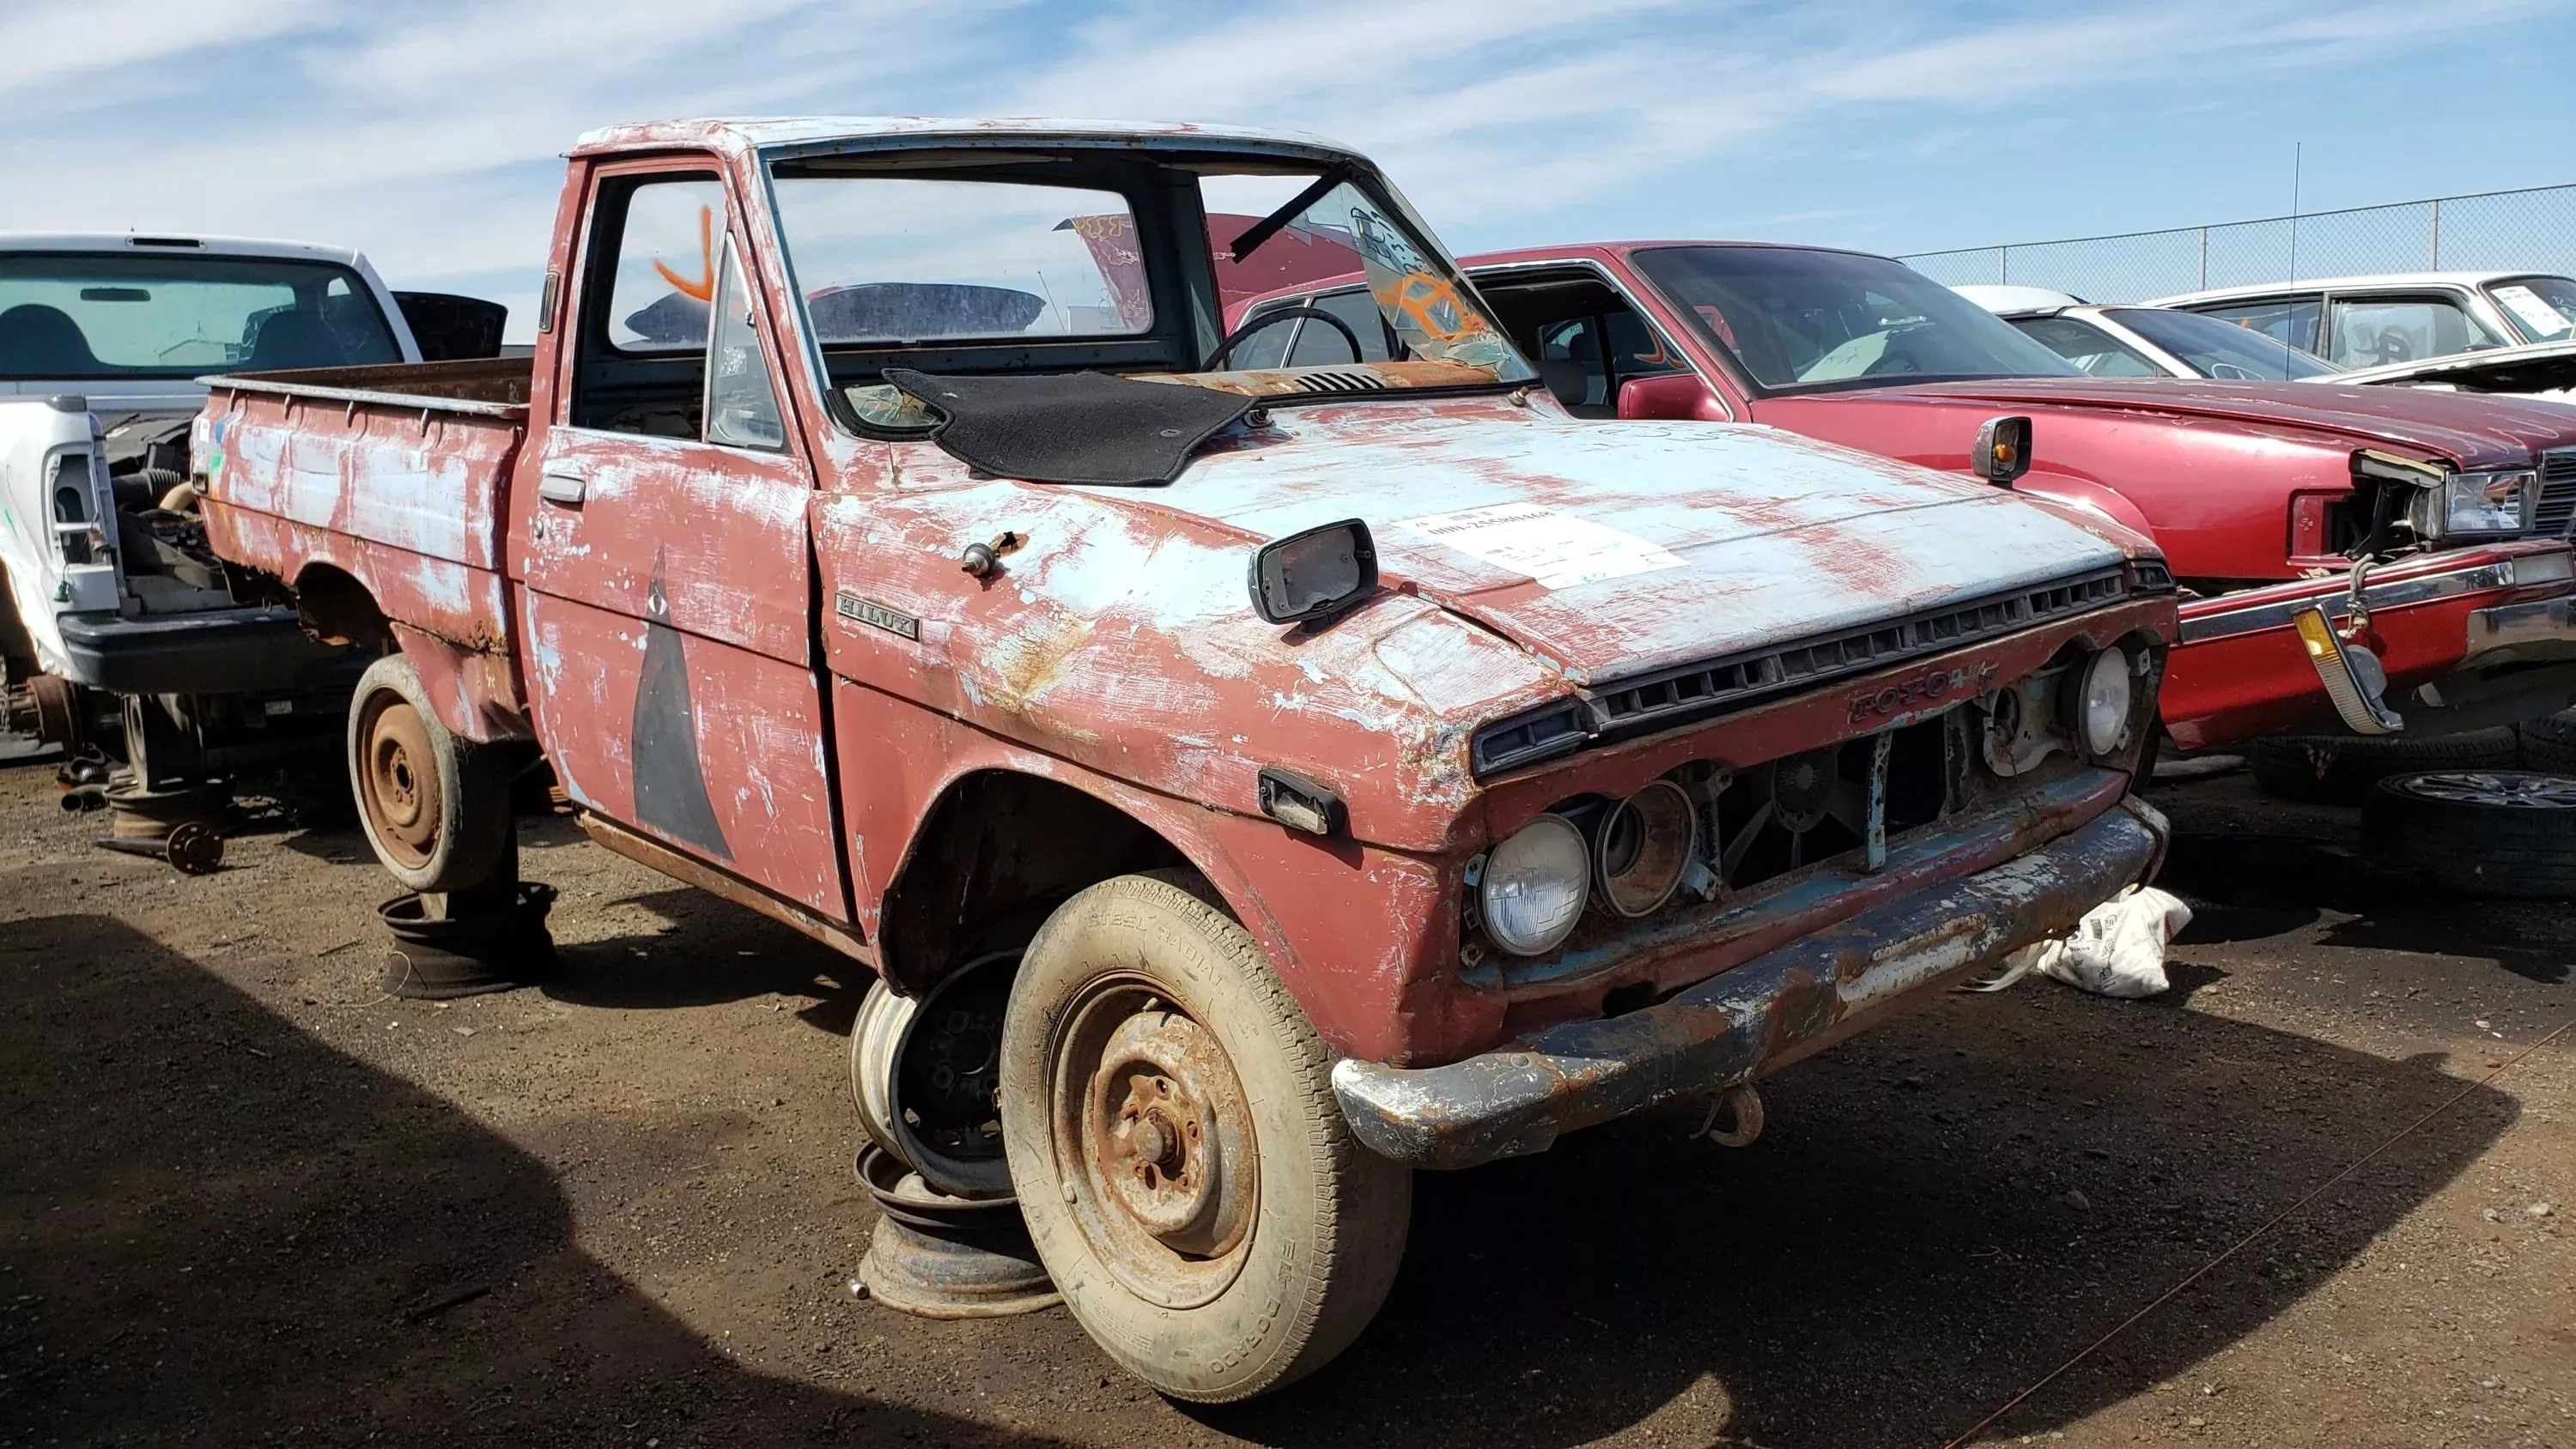 Selling Your Car or Truck to a Junkyard Near Me